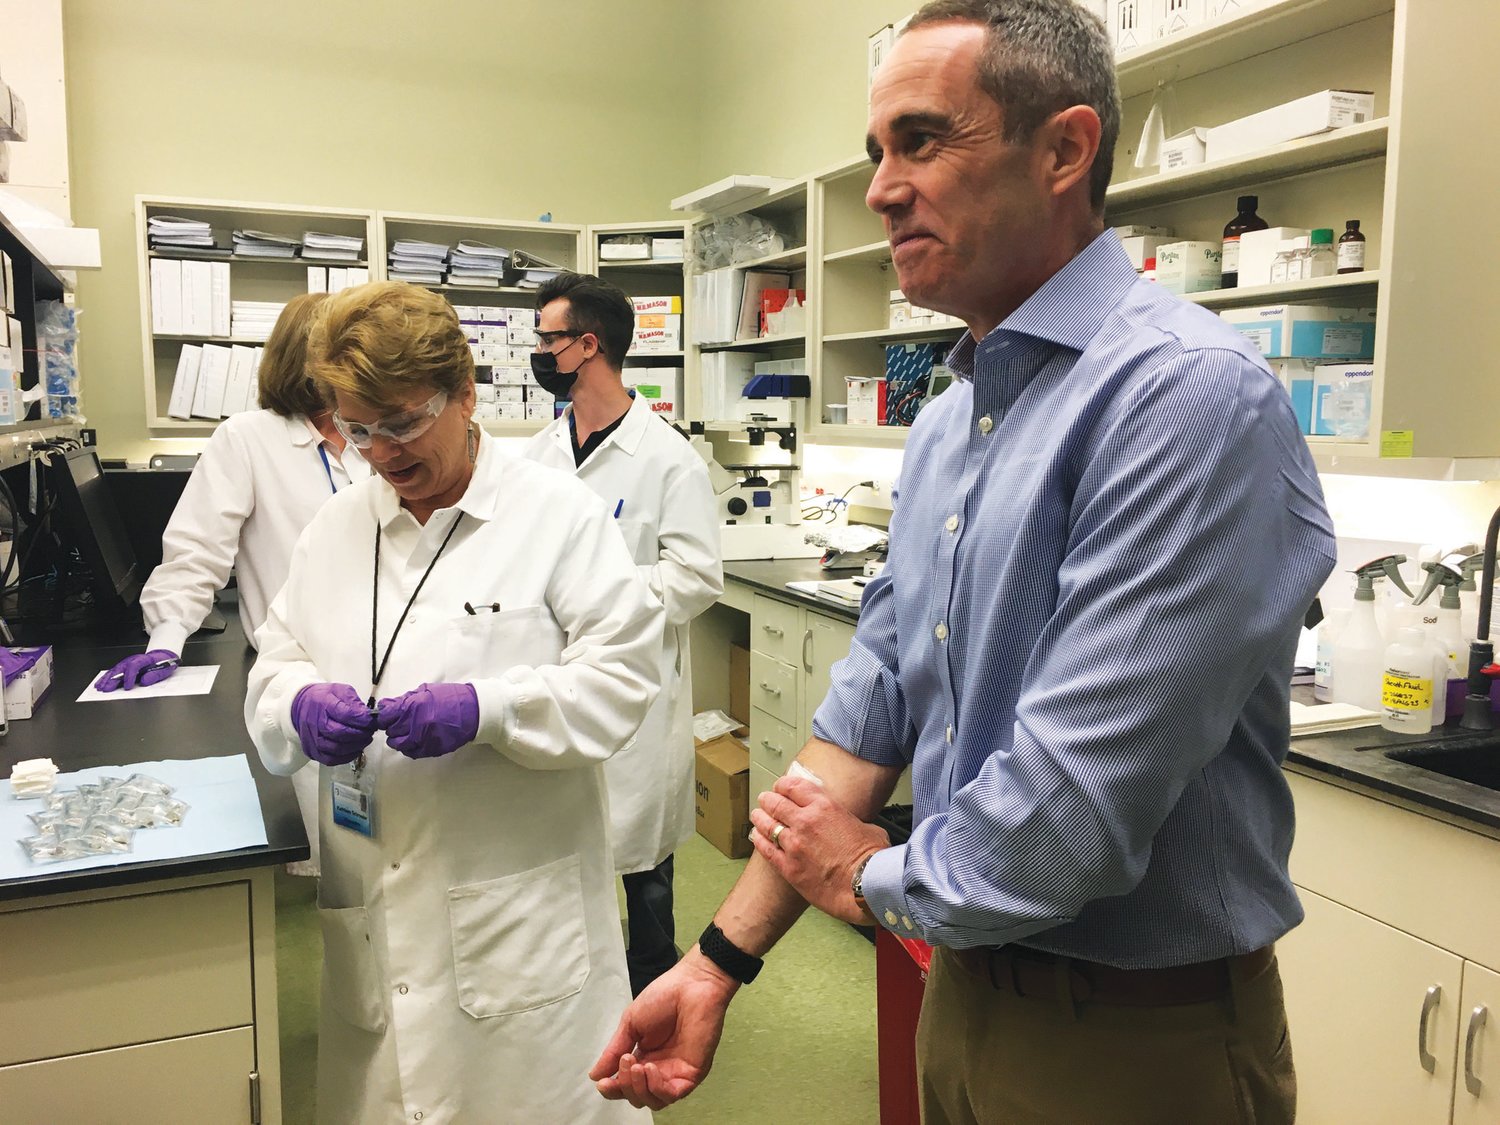 July: State Sen. Steve Santarsiero receives a new test that measures the level of antibodies to COVID-19. The test – VaxEffect – was developed by FlowMetric at the Bucks County Biotechnology Center in Buckingham Township.